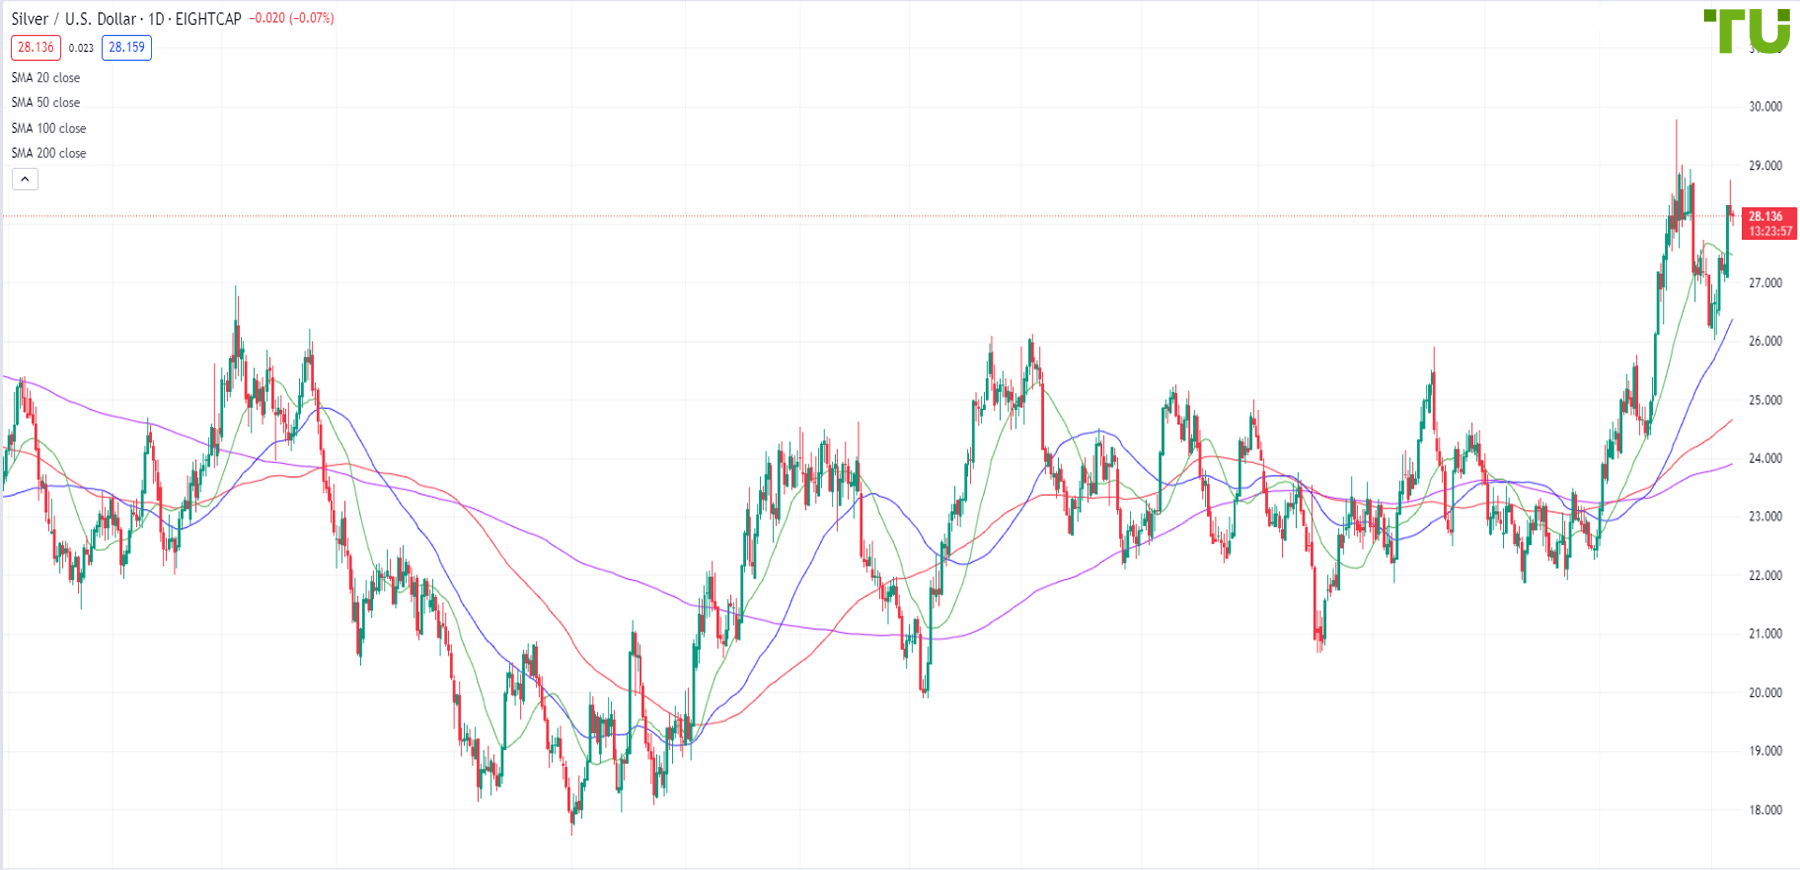 XAG/USD is testing support at .00 per ounce